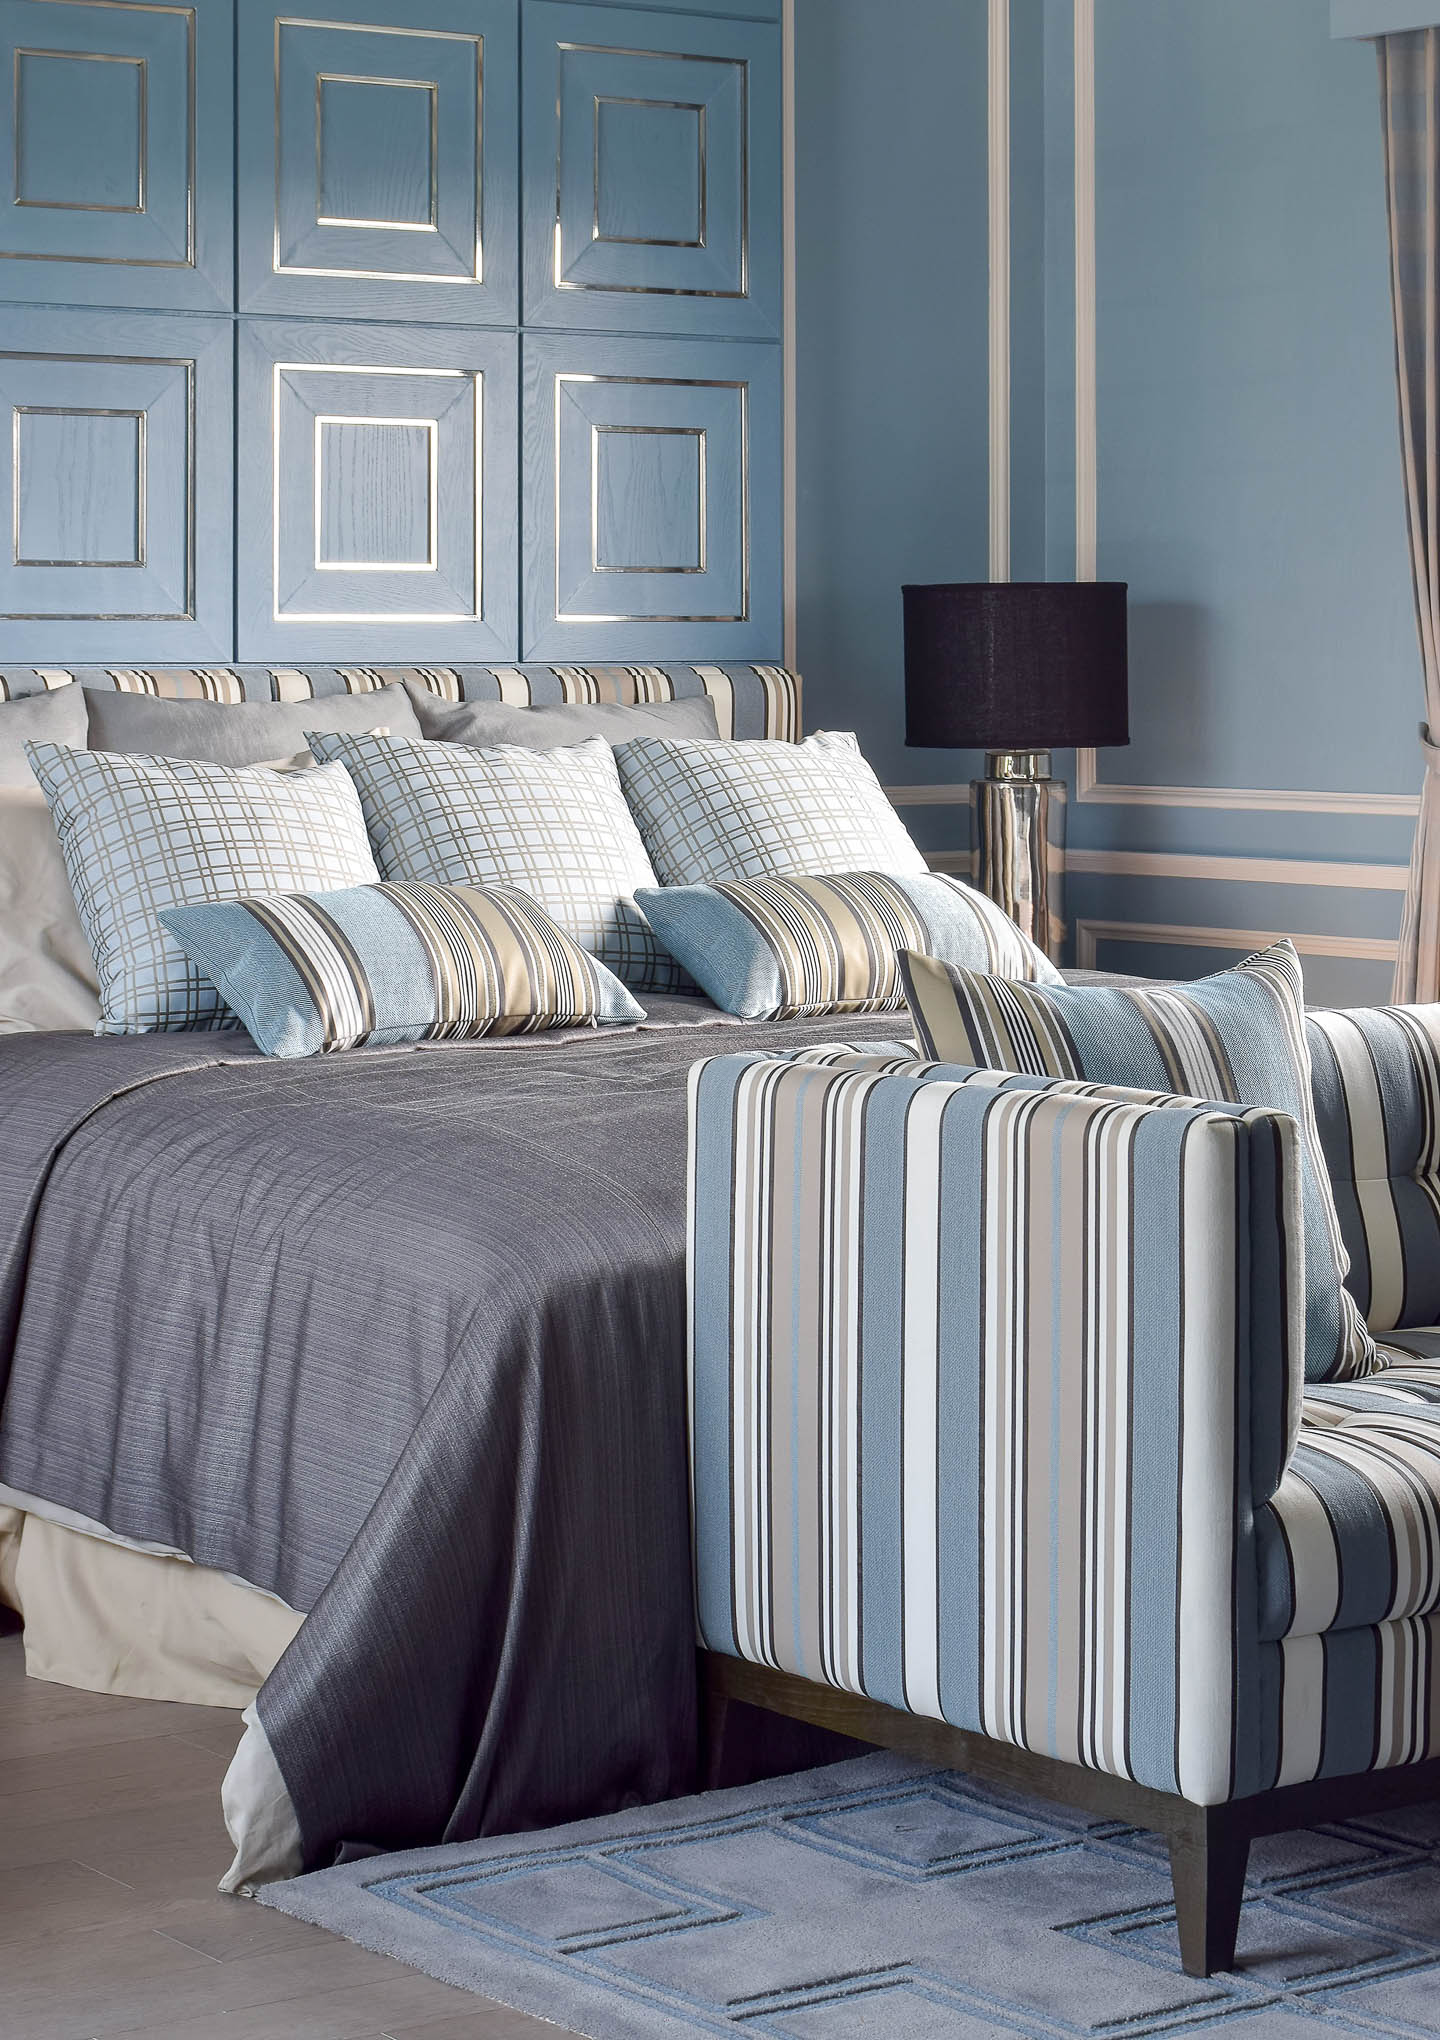 Silver and light blue accent wall behind a bed with gray and blue bedding